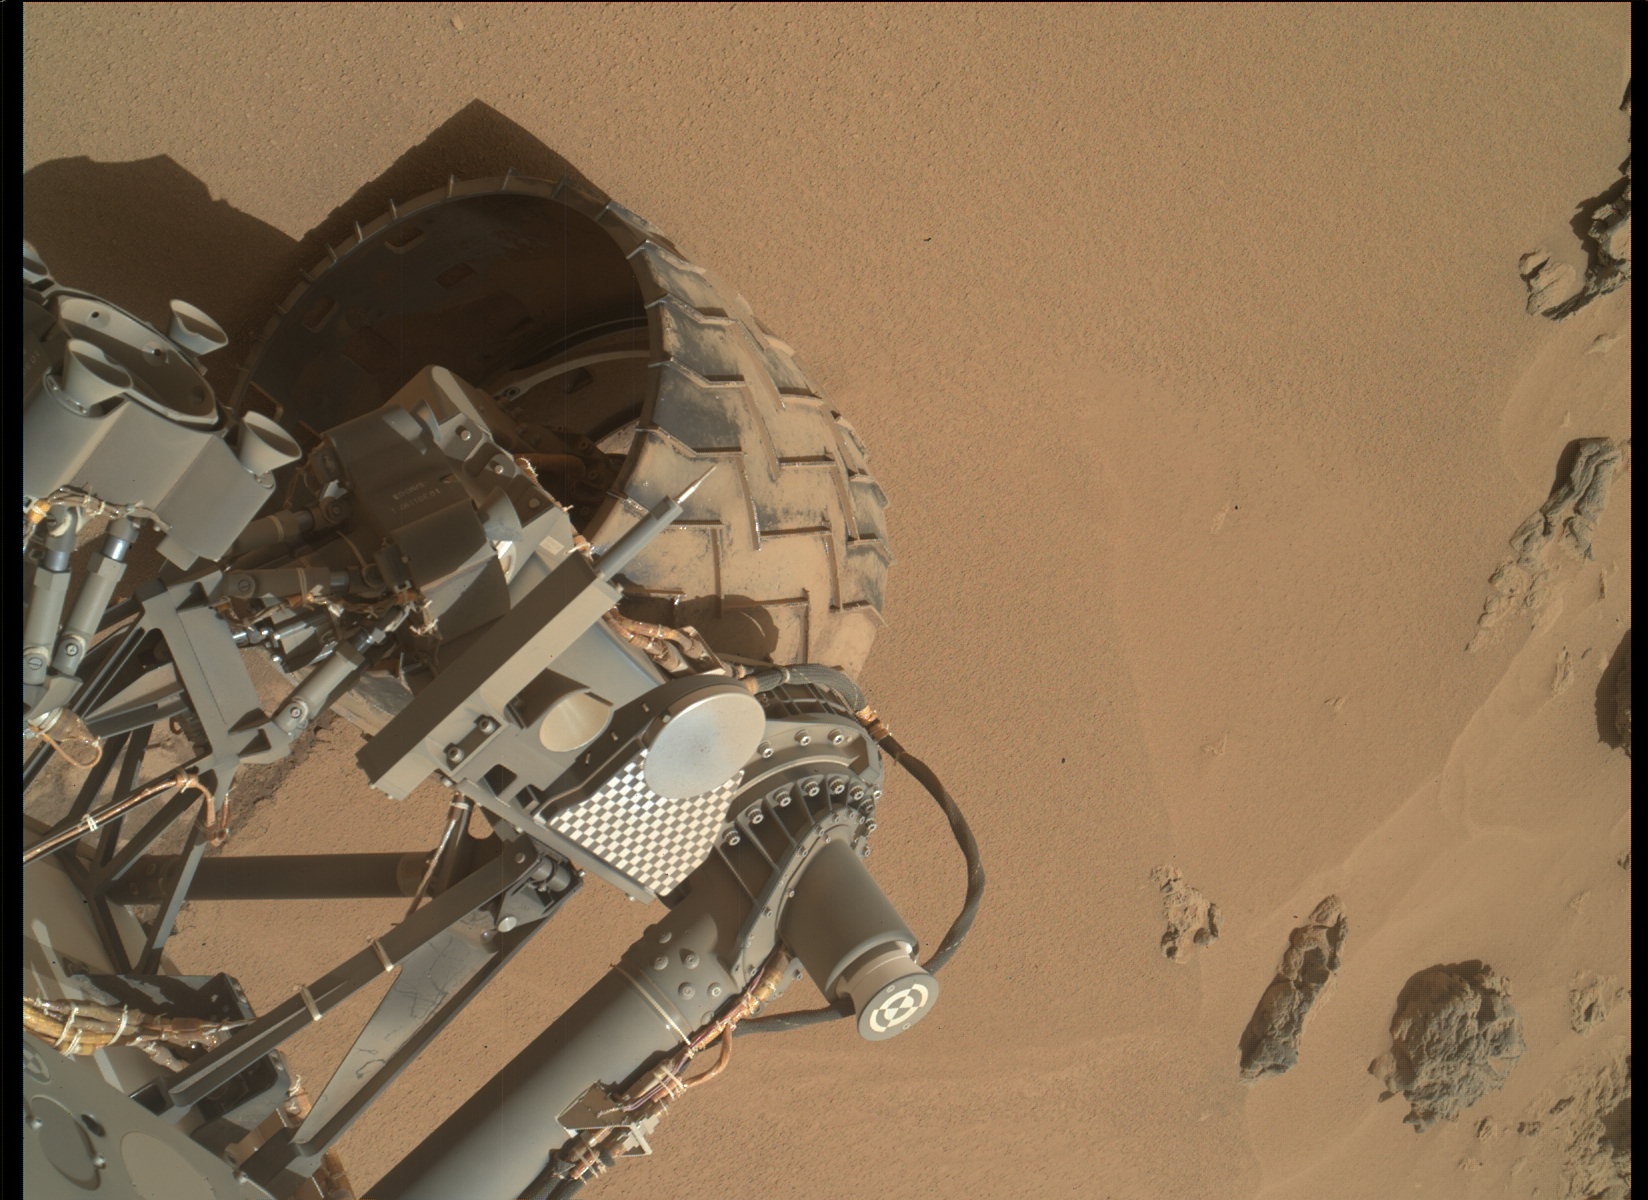 Nasa's Mars rover Curiosity acquired this image using its Mars Hand Lens Imager (MAHLI) on Sol 85